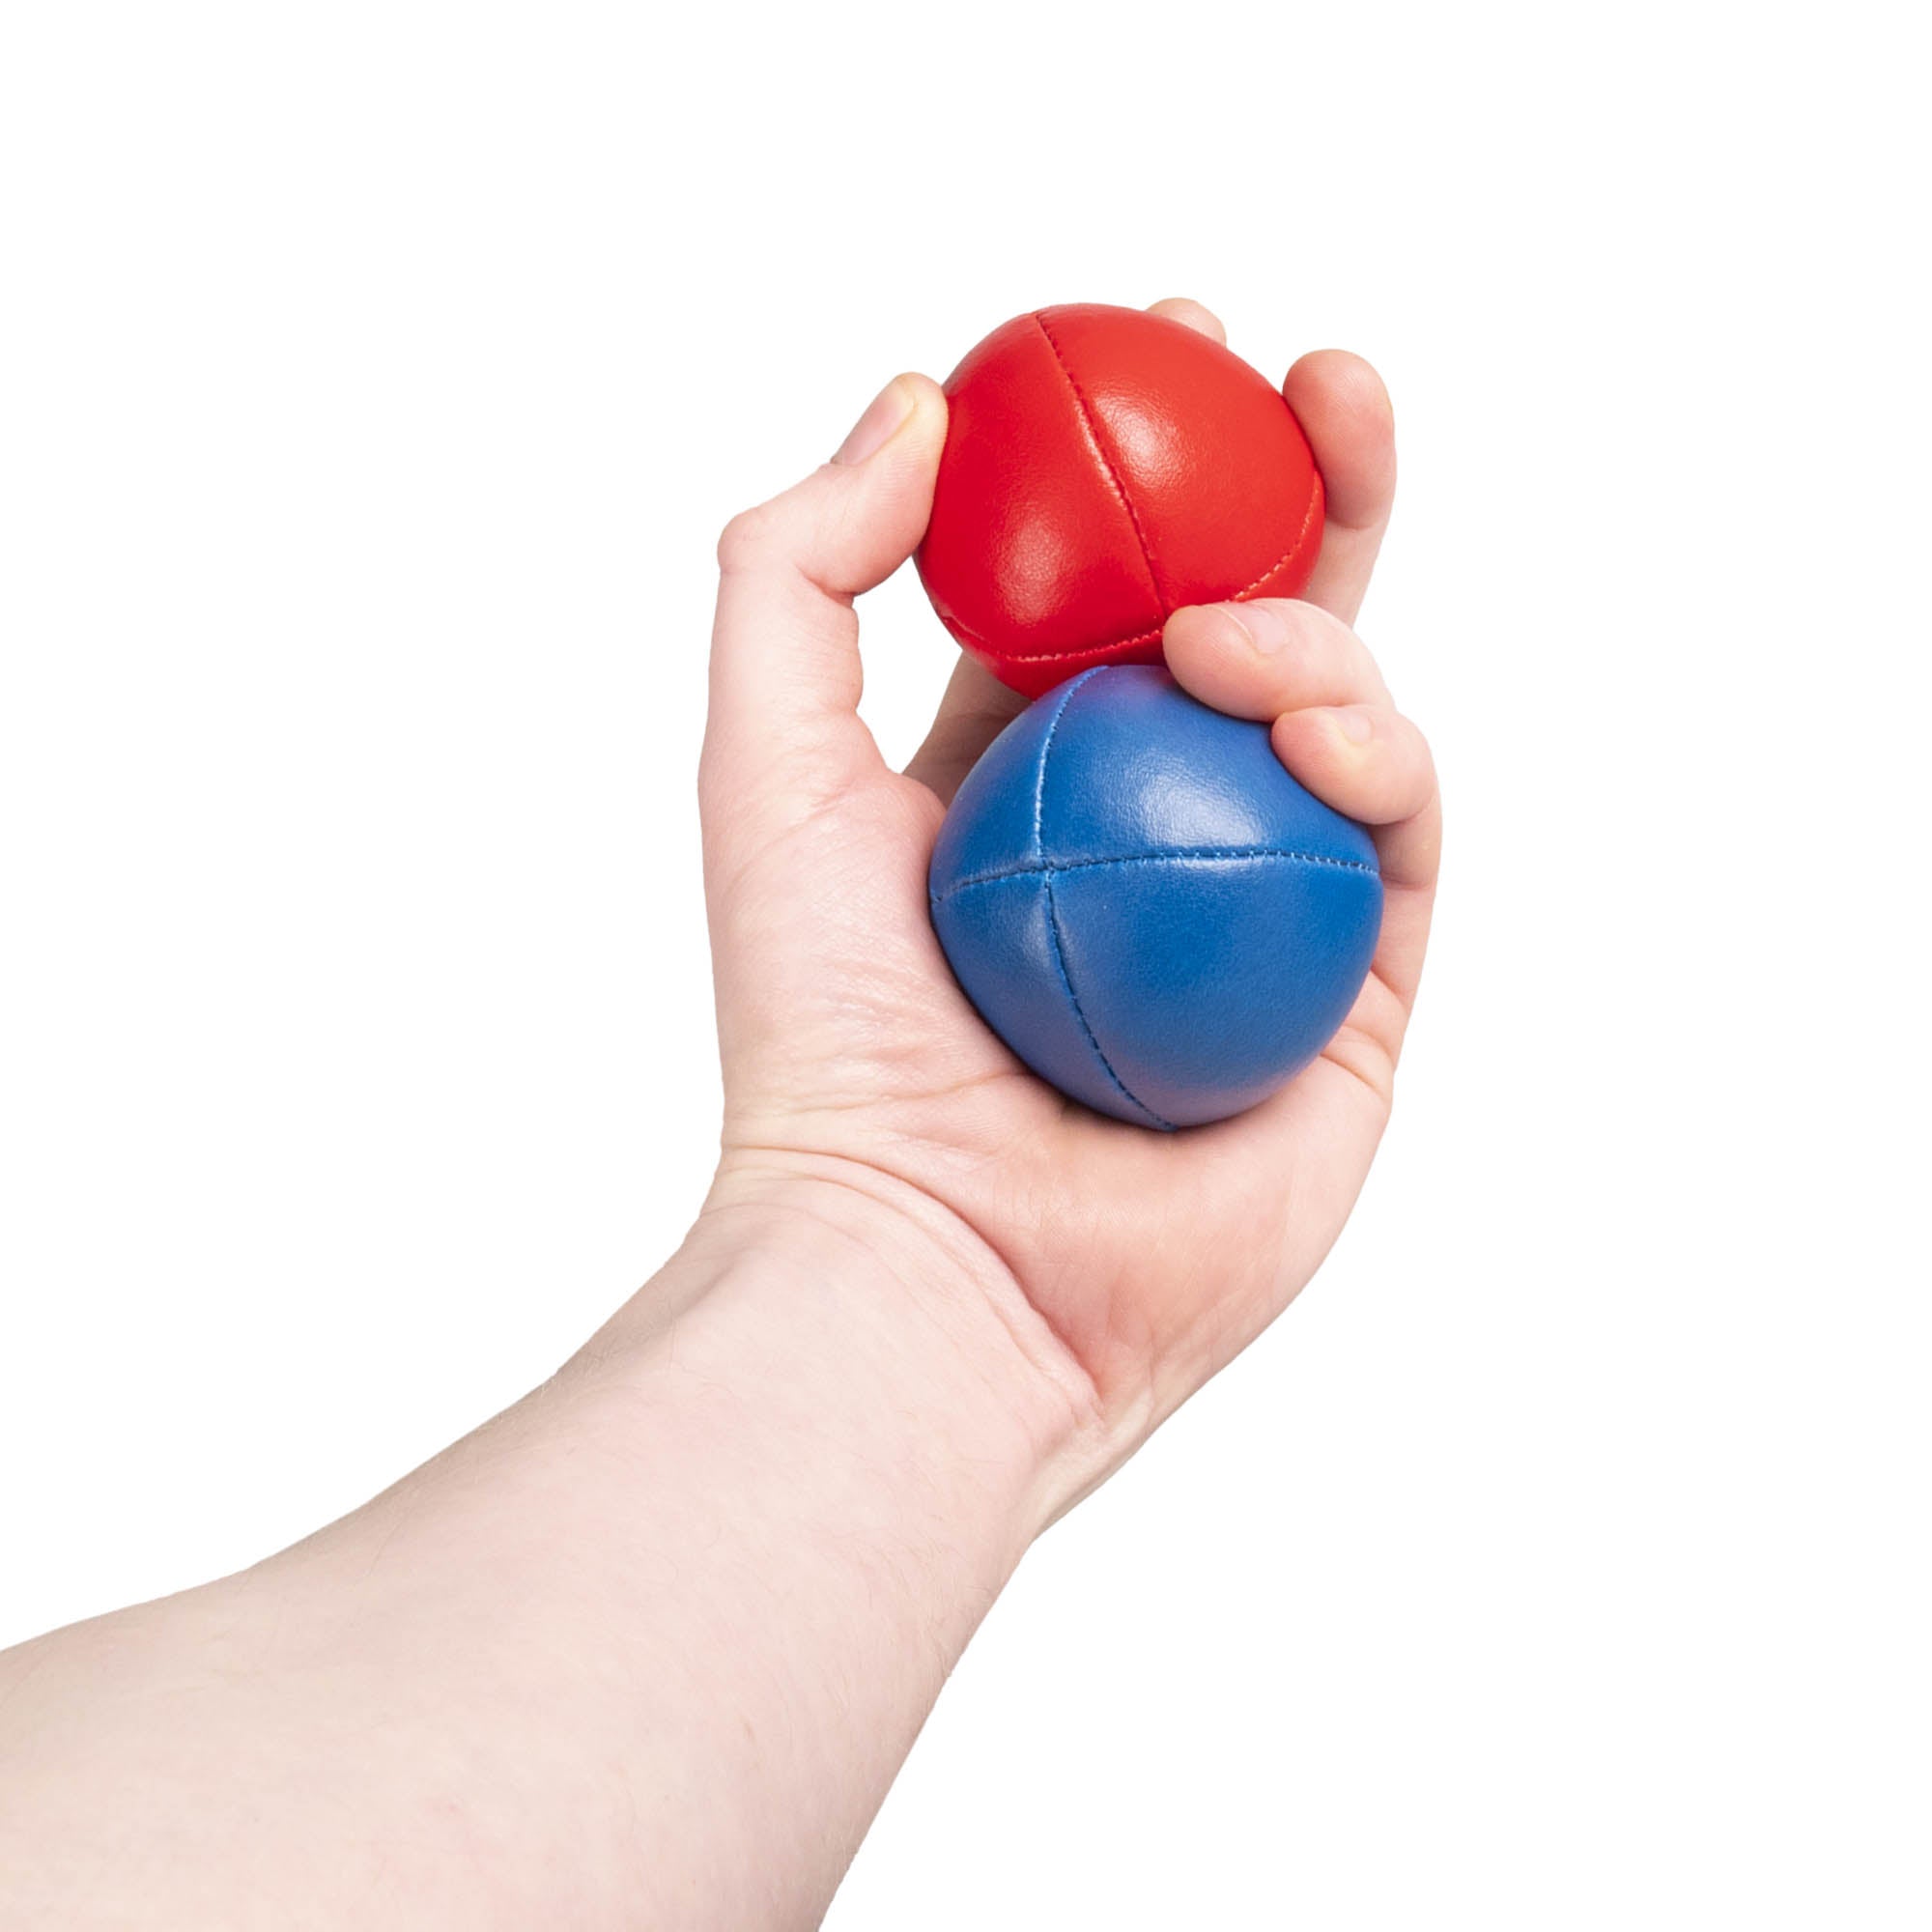 2 different colour balls in hand